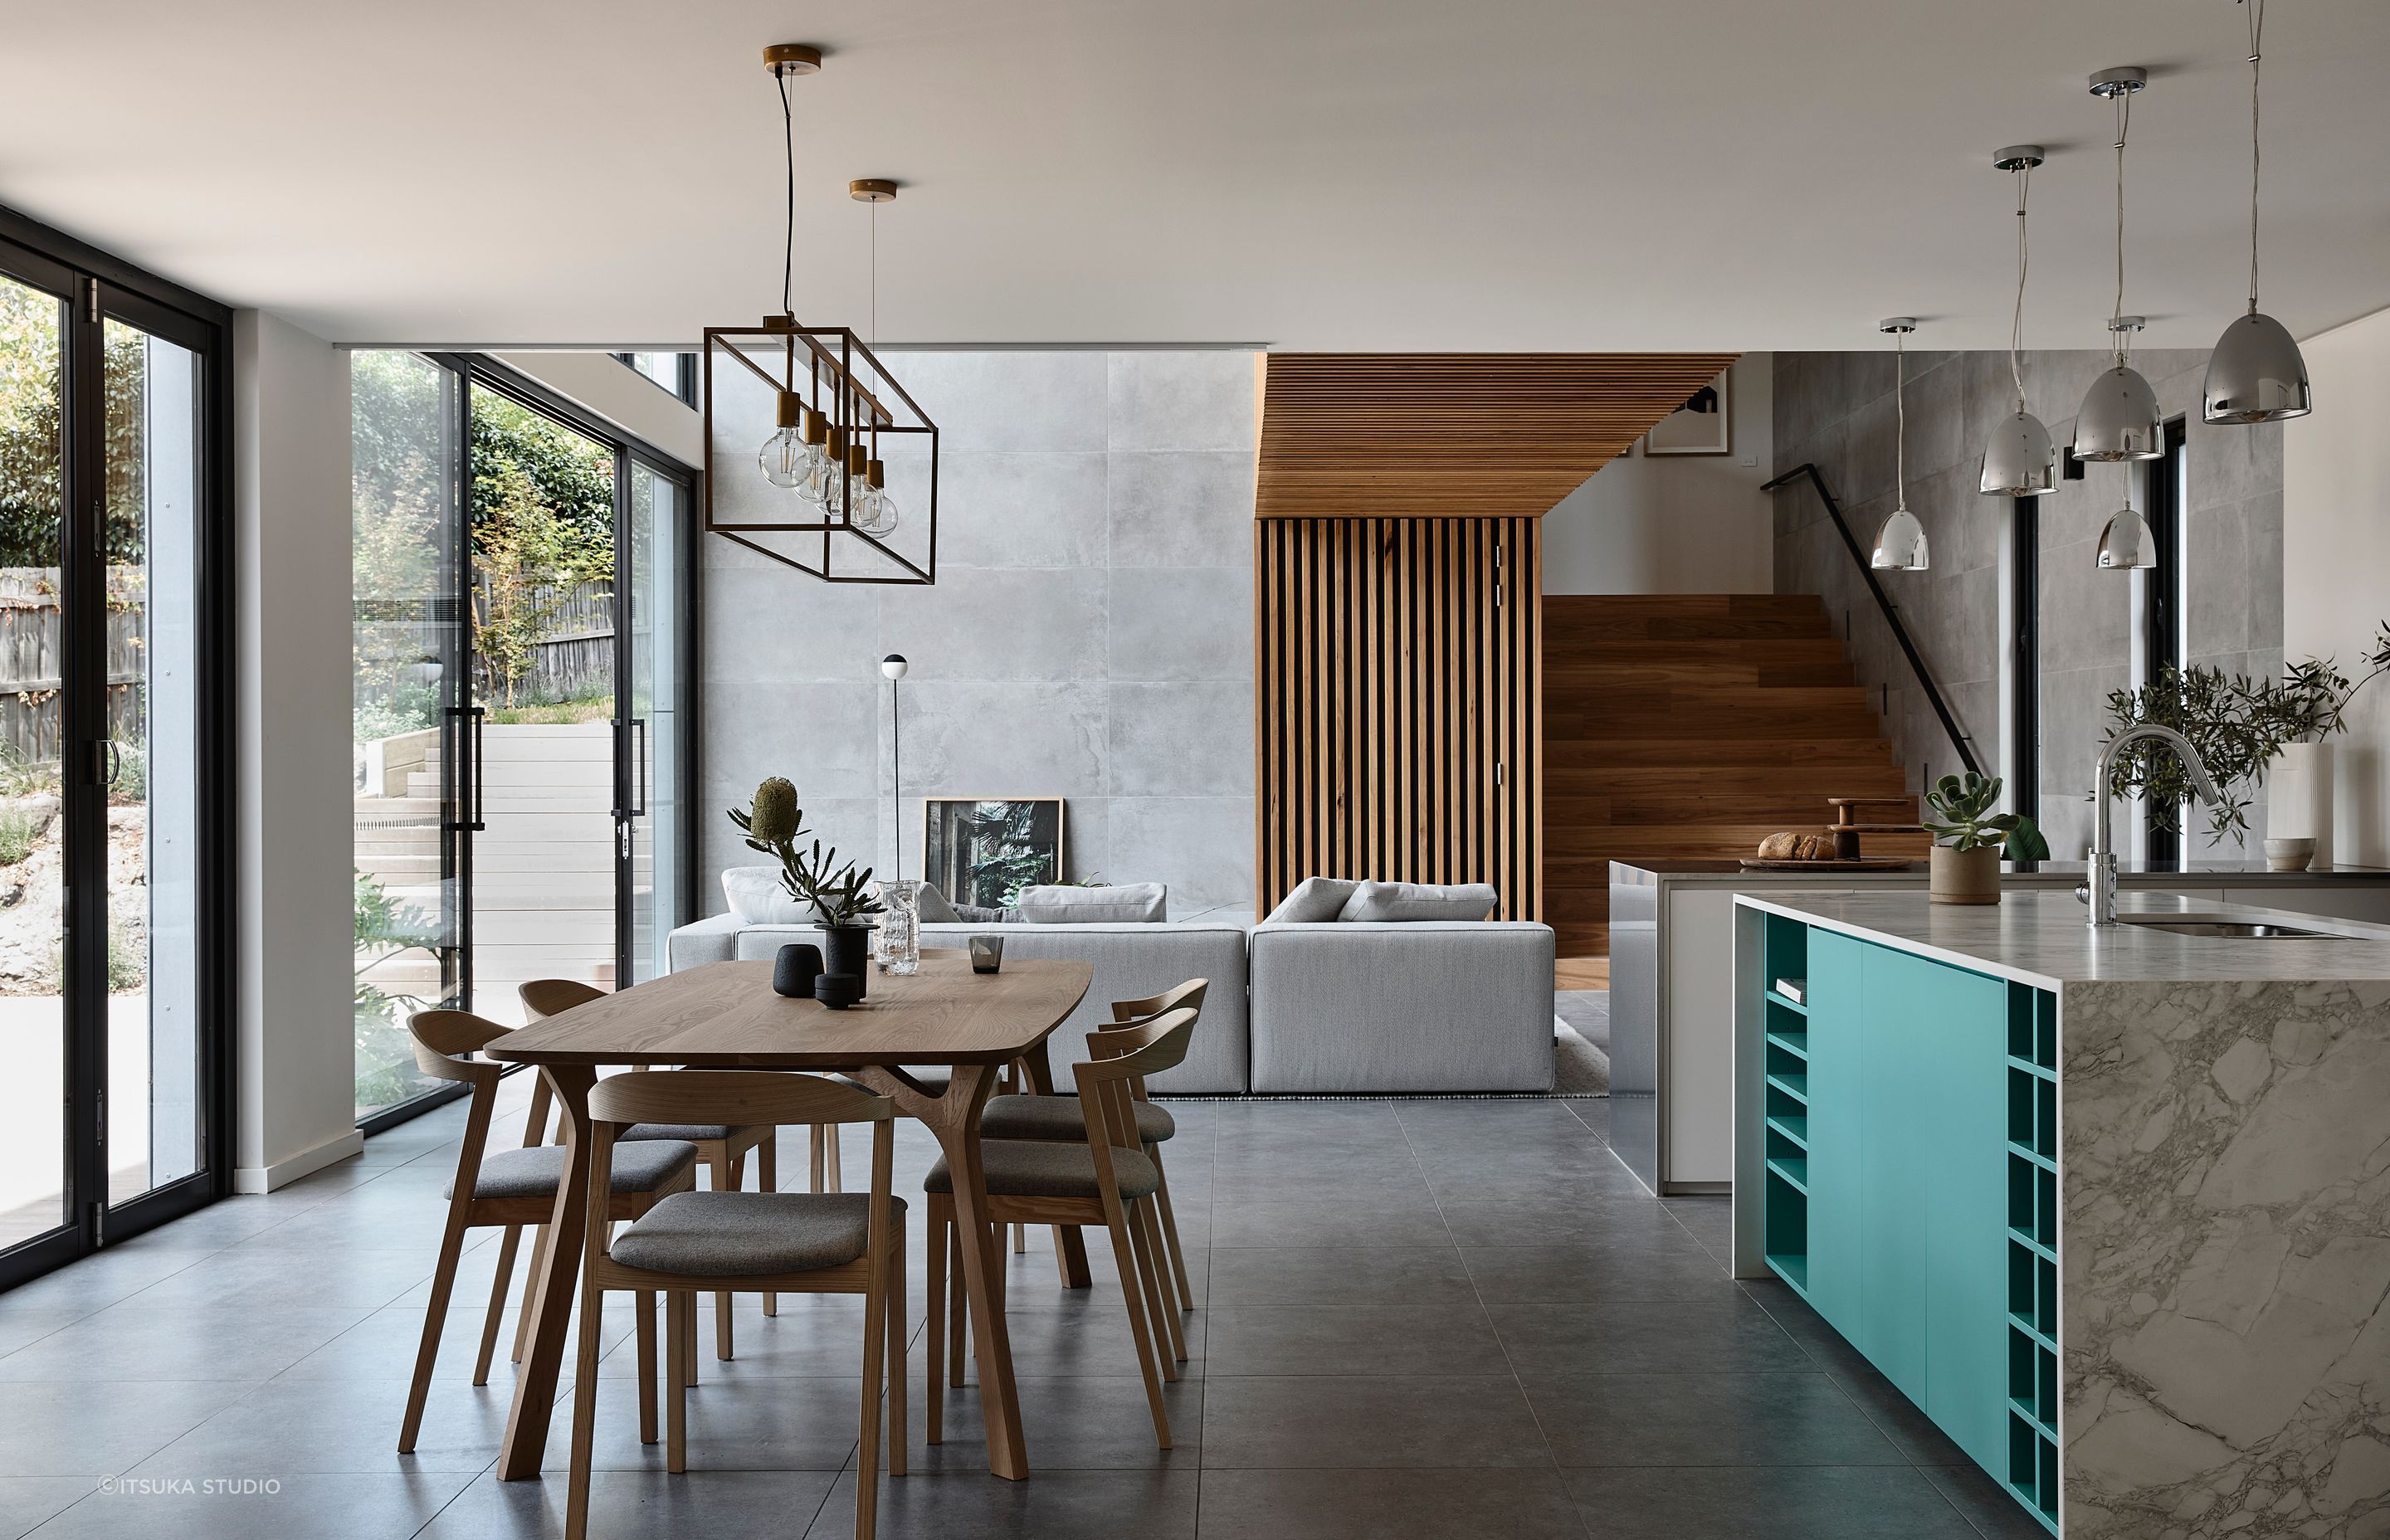 While the timber-clad link bridge is the feature of the double-height living area, a feature has also been made of the kitchen with its vibrant blue accents. 